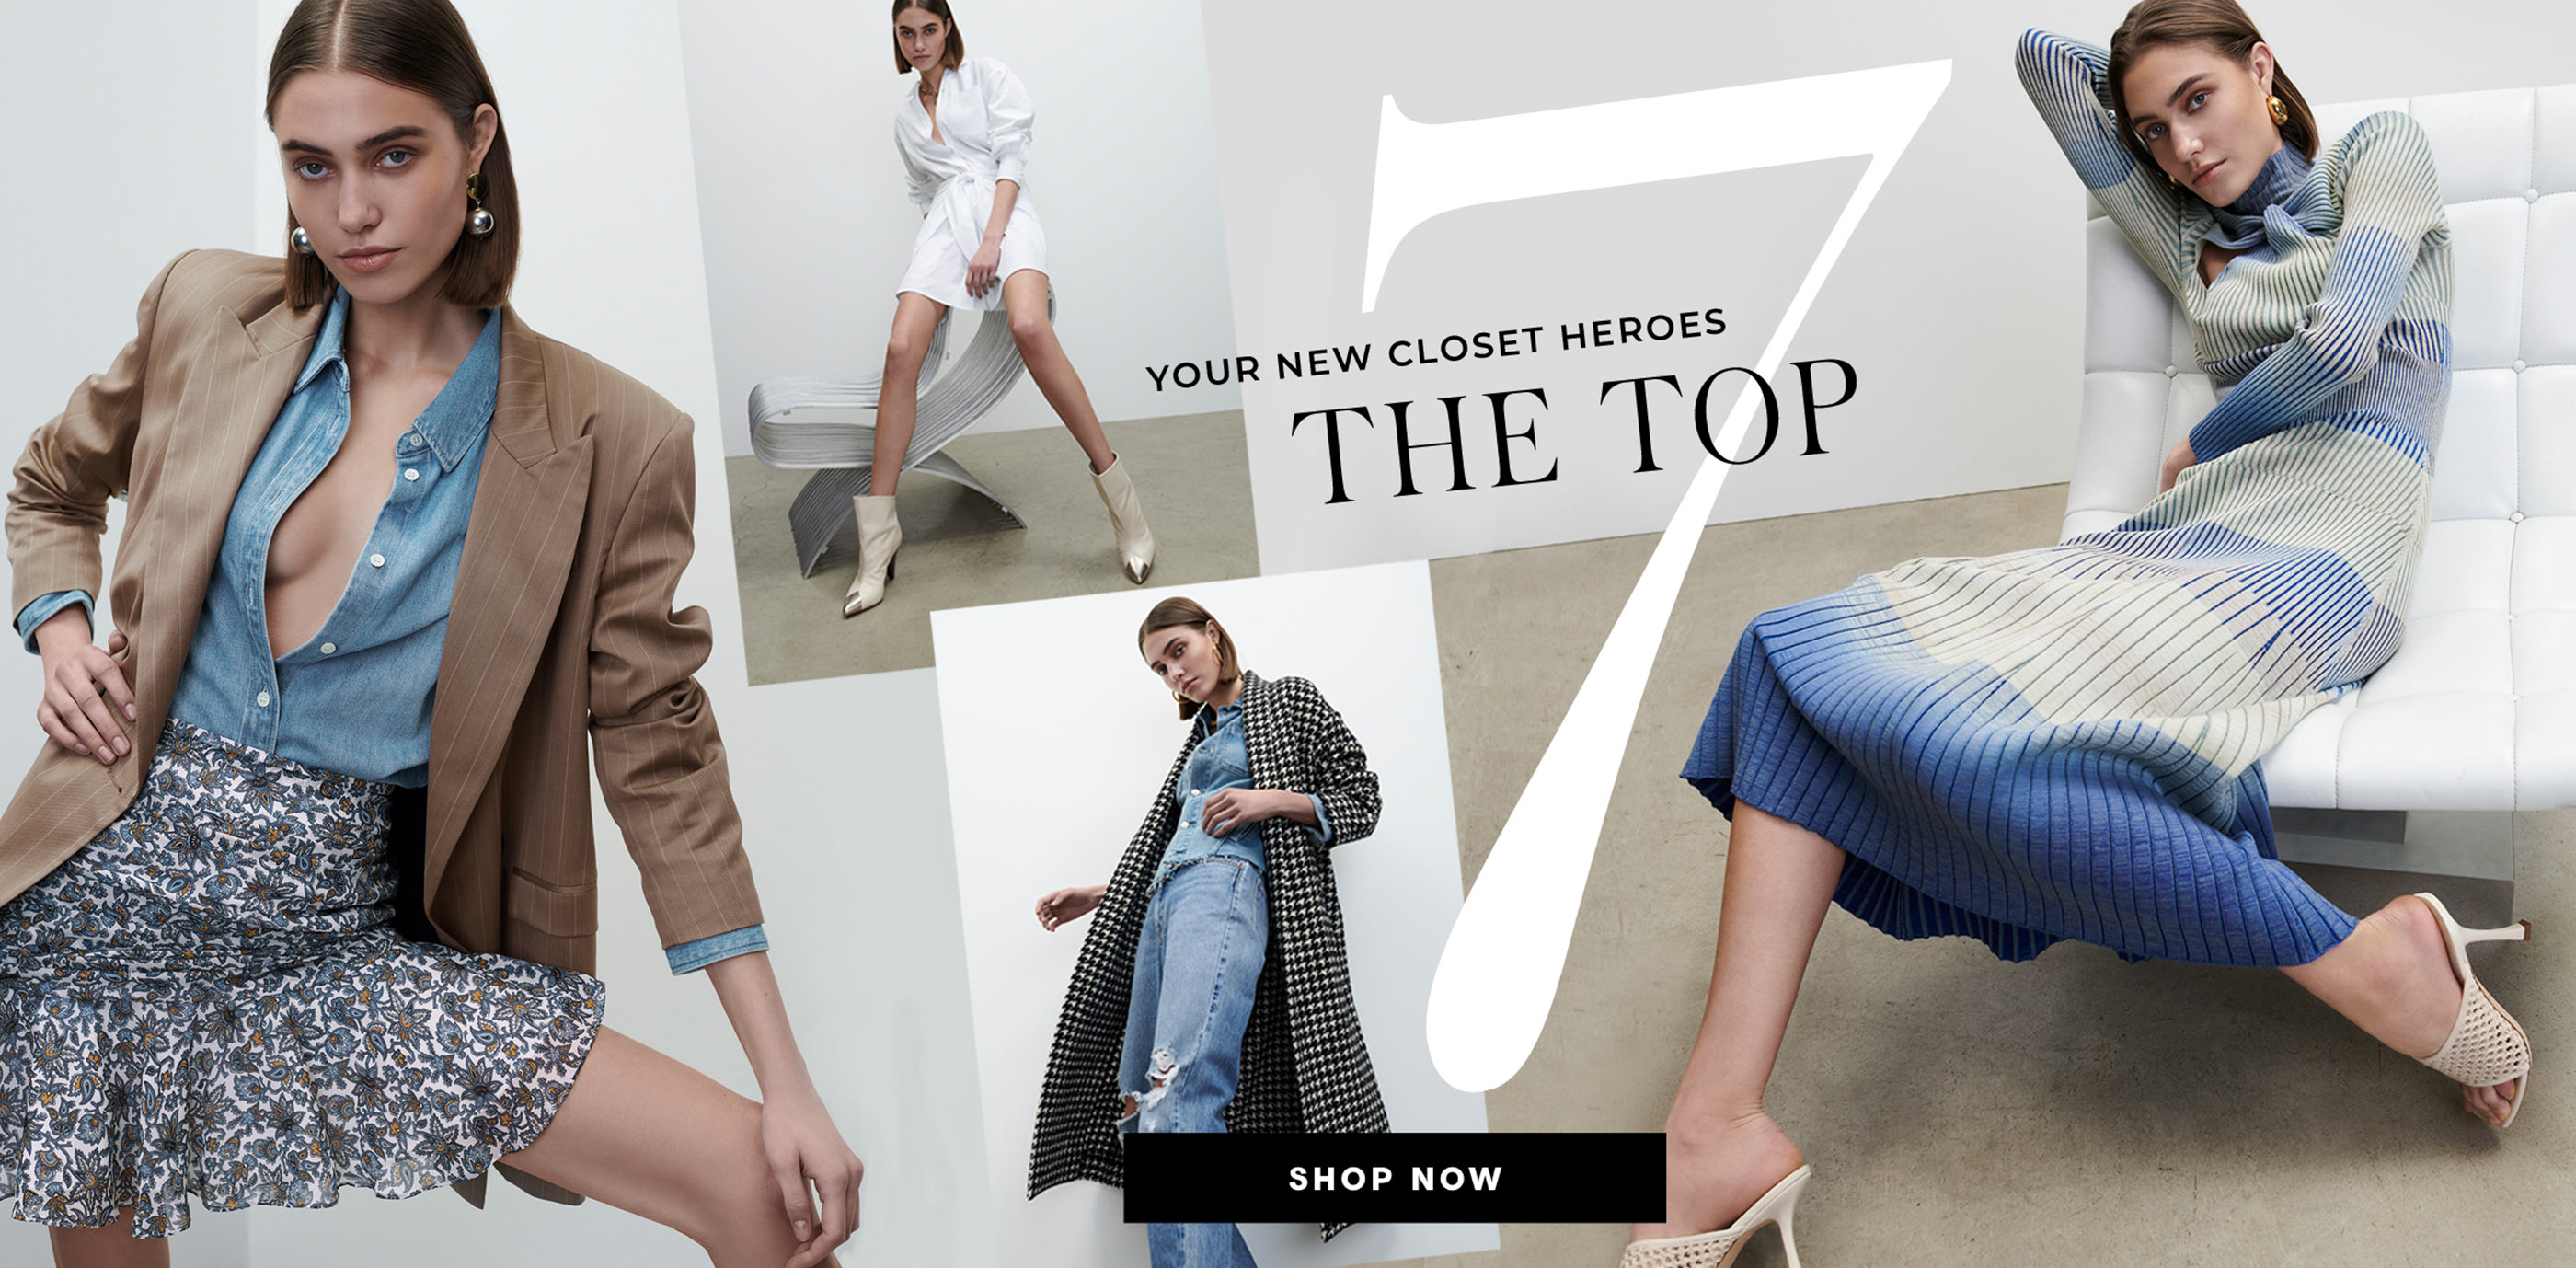 "Your New Closet Heros  The Top"